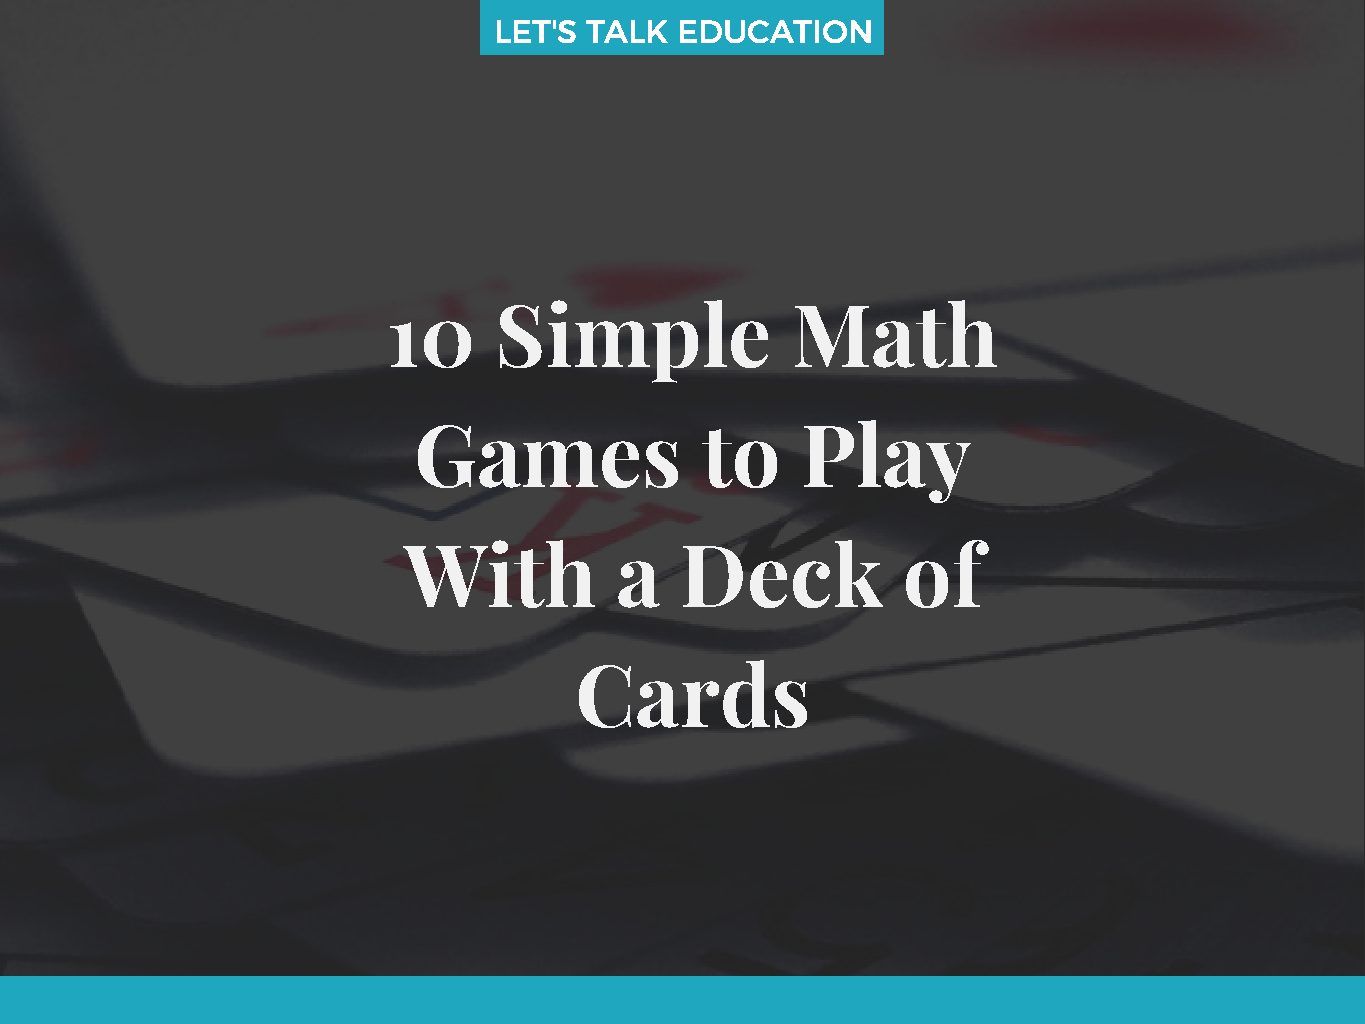 10 Simple Math Games to Play With a Deck of Cards